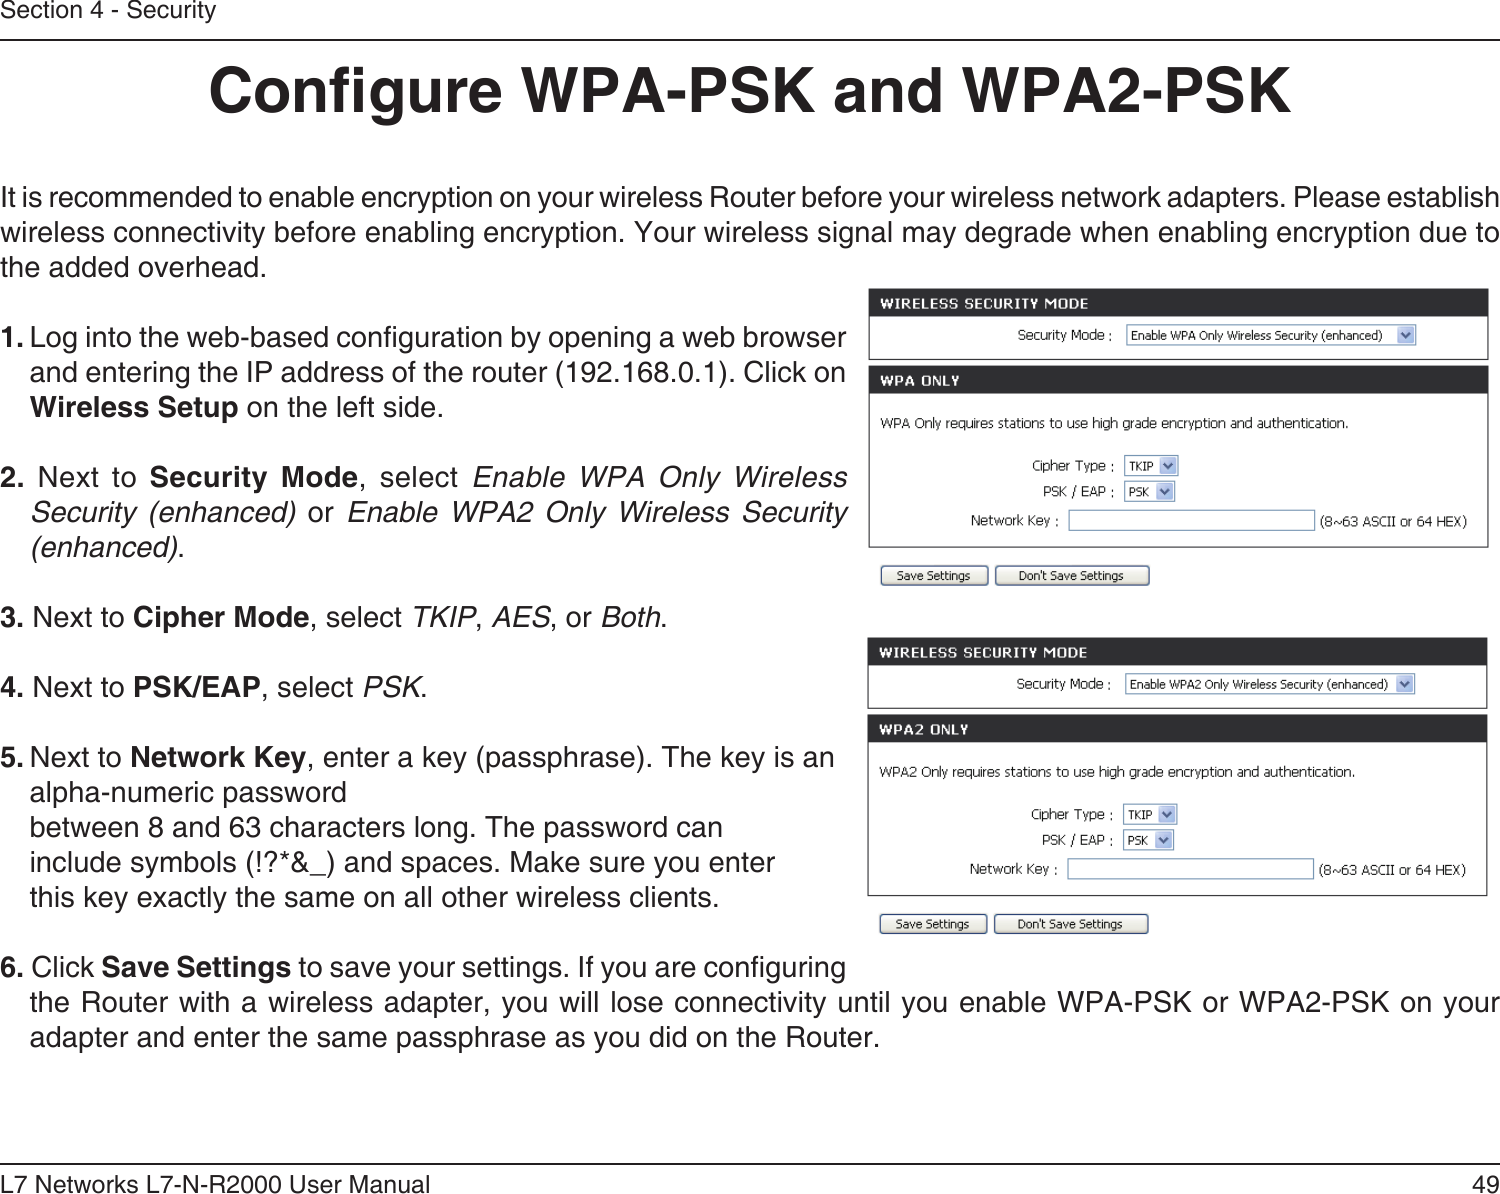 49L7 Networks L7-N-R2000 User ManualSection 4 - SecurityCongure WPA-PSK and WPA2-PSKIt is recommended to enable encryption on your wireless Router before your wireless network adapters. Please establish wireless connectivity before enabling encryption. Your wireless signal may degrade when enabling encryption due to the added overhead.1. Log into the web-based conguration by opening a web browser and entering the IP address of the router (192.168.0.1). Click on Wireless Setup on the left side.2.  Next  to  Security  Mode,  select  Enable  WPA  Only  Wireless Security  (enhanced)  or  Enable  WPA2  Only  Wireless  Security (enhanced).3. Next to Cipher Mode, select TKIP, AES, or Both.4. Next to PSK/EAP, select PSK.5. Next to Network Key, enter a key (passphrase). The key is an alpha-numeric password between 8 and 63 characters long. The password can include symbols (!?*&amp;_) and spaces. Make sure you enter this key exactly the same on all other wireless clients.6. Click Save Settings to save your settings. If you are conguring the Router with a wireless adapter, you will lose connectivity until you enable WPA-PSK or WPA2-PSK on your adapter and enter the same passphrase as you did on the Router.